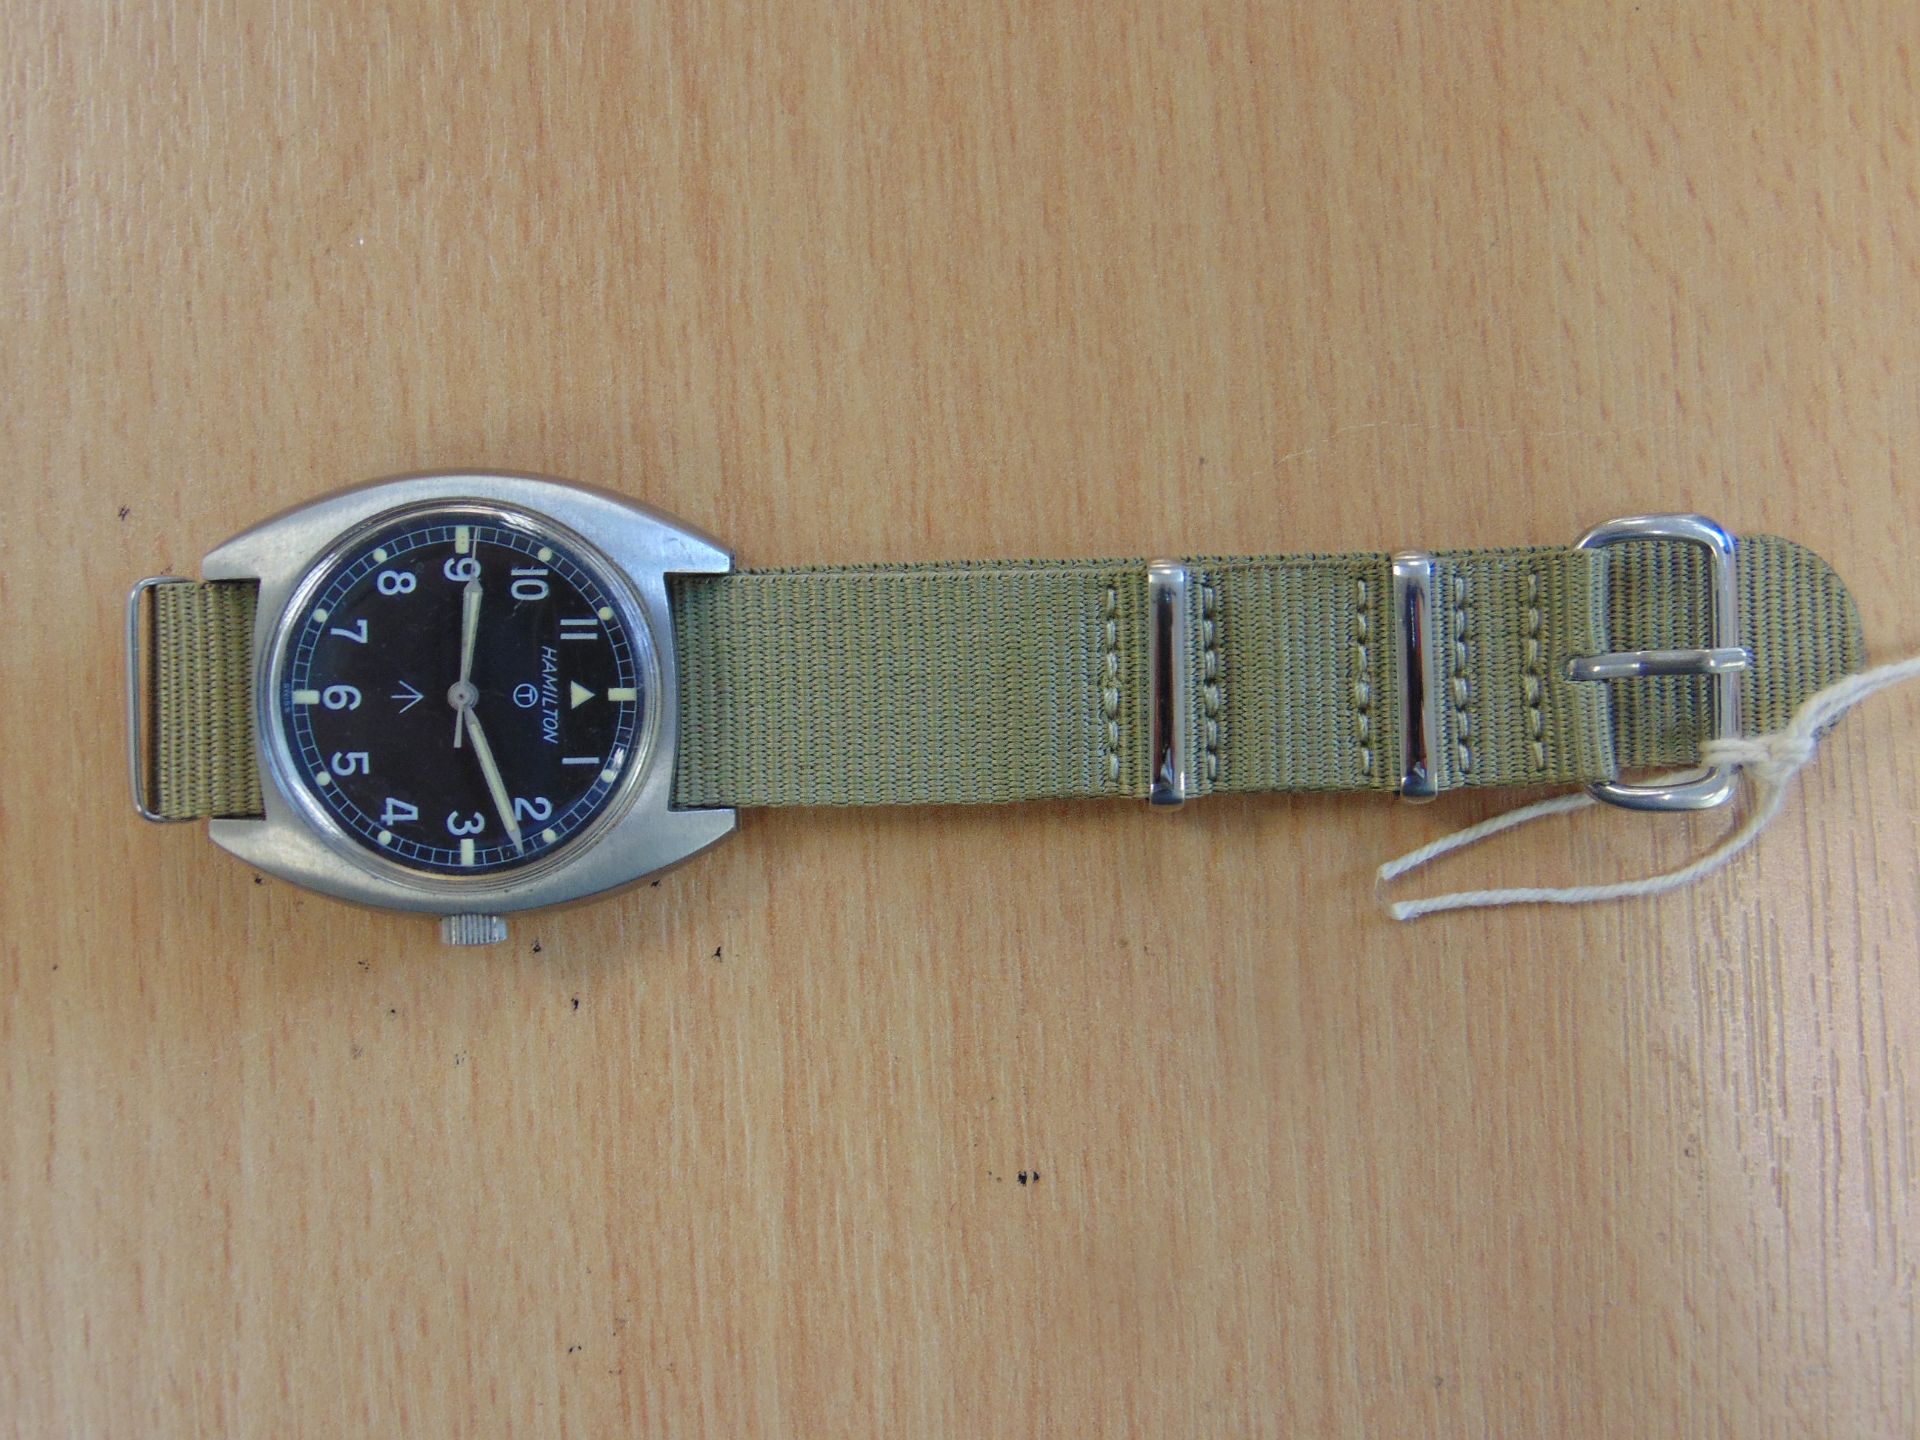 V.V. RARE UNISSUED HAMITON WIND UP W10 SERVICE WATCH NATO MARKINGS DATED 1973 - Image 2 of 8